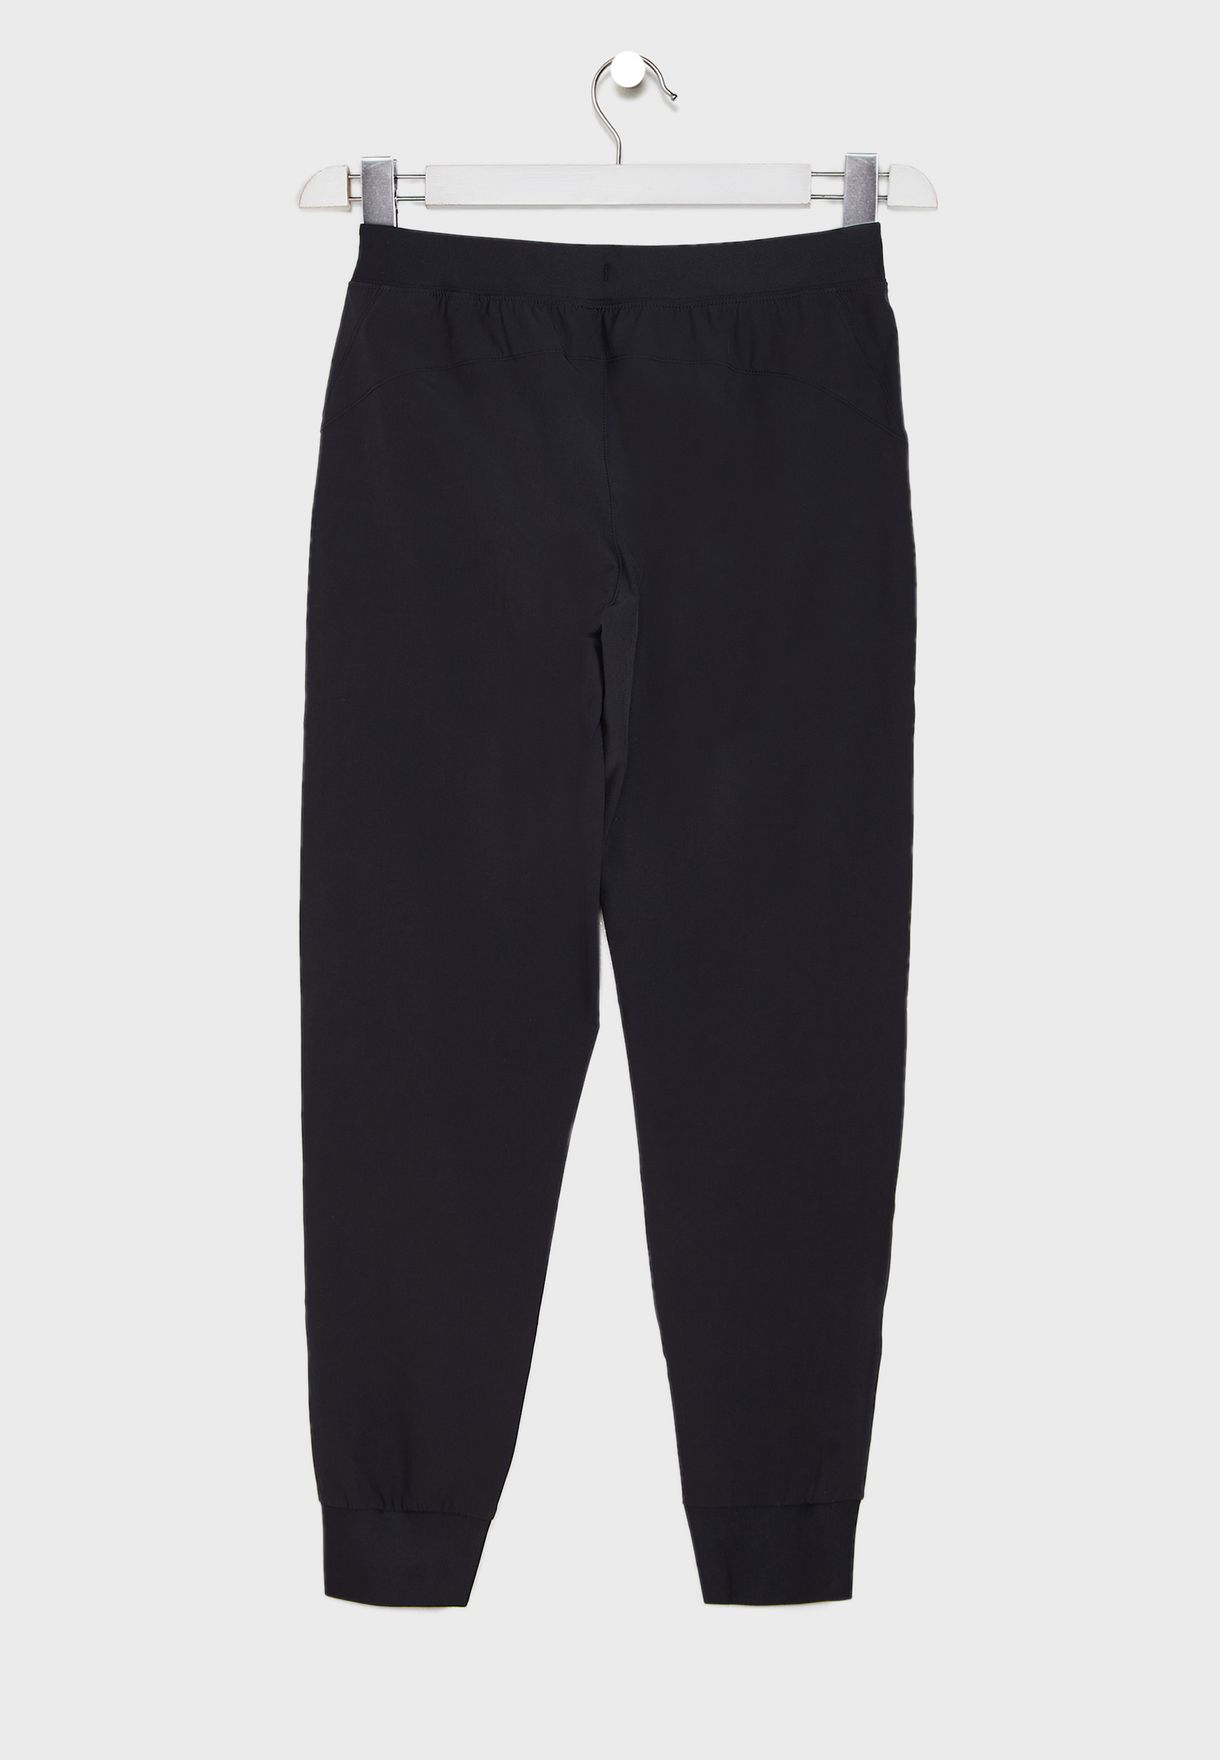 Youth Woven Sweatpants